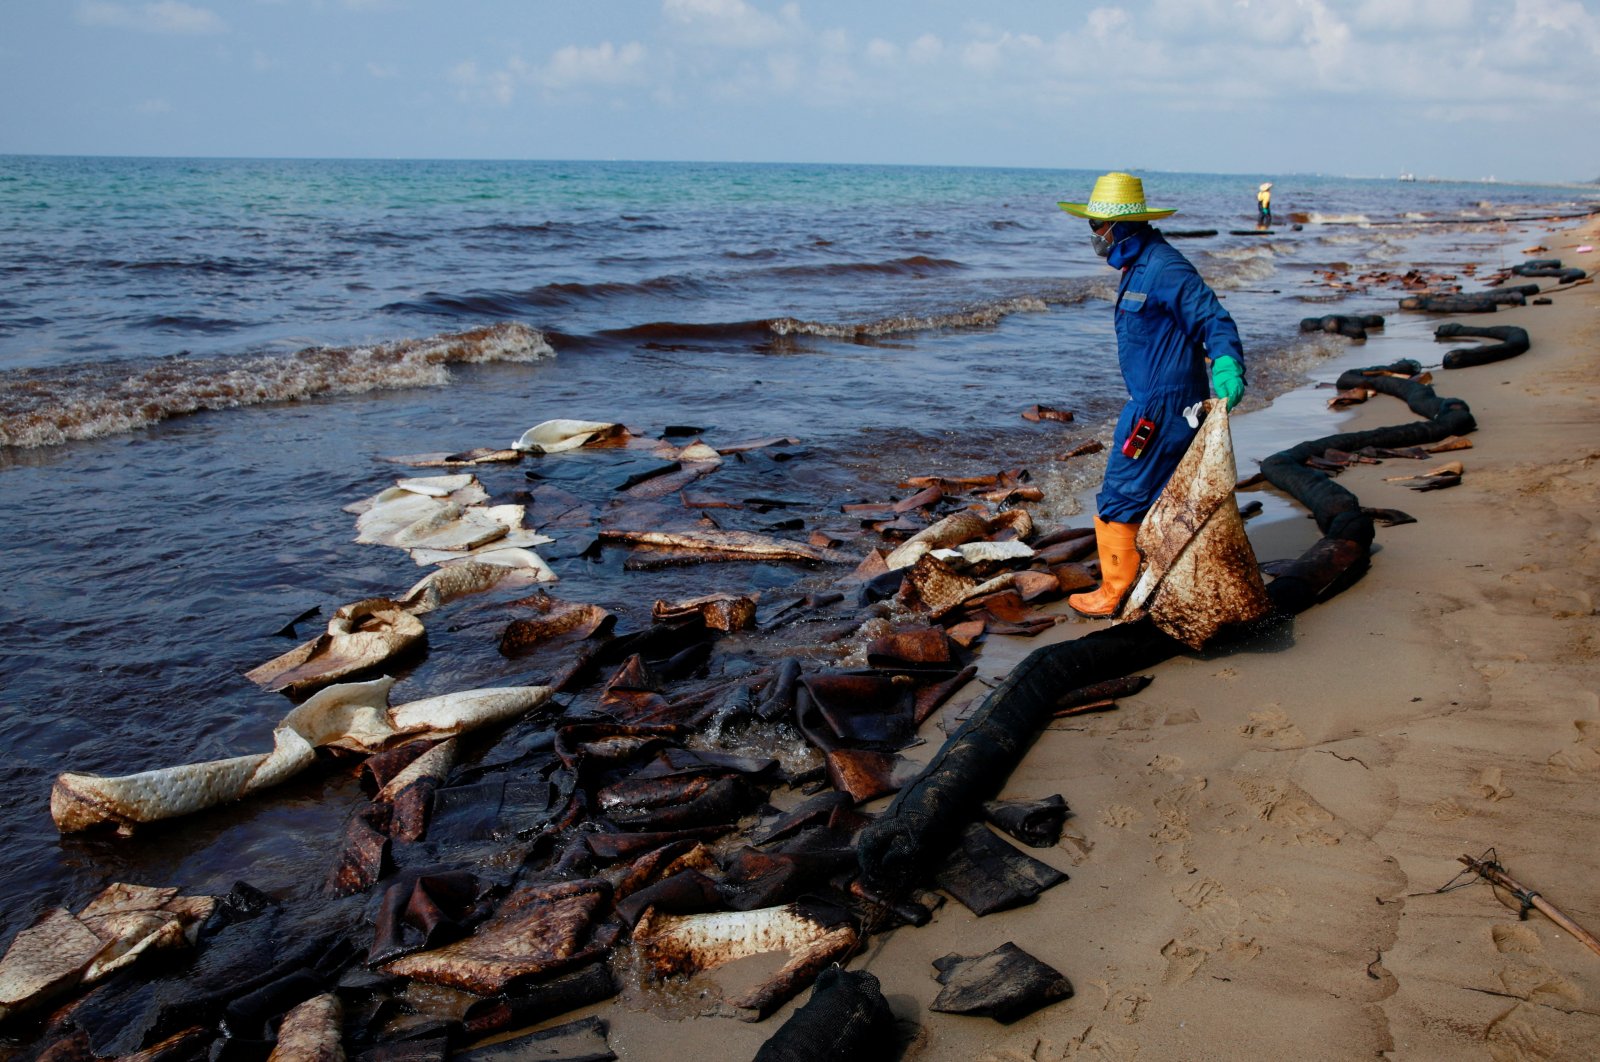 Thai beach declared area of disaster after oil spill